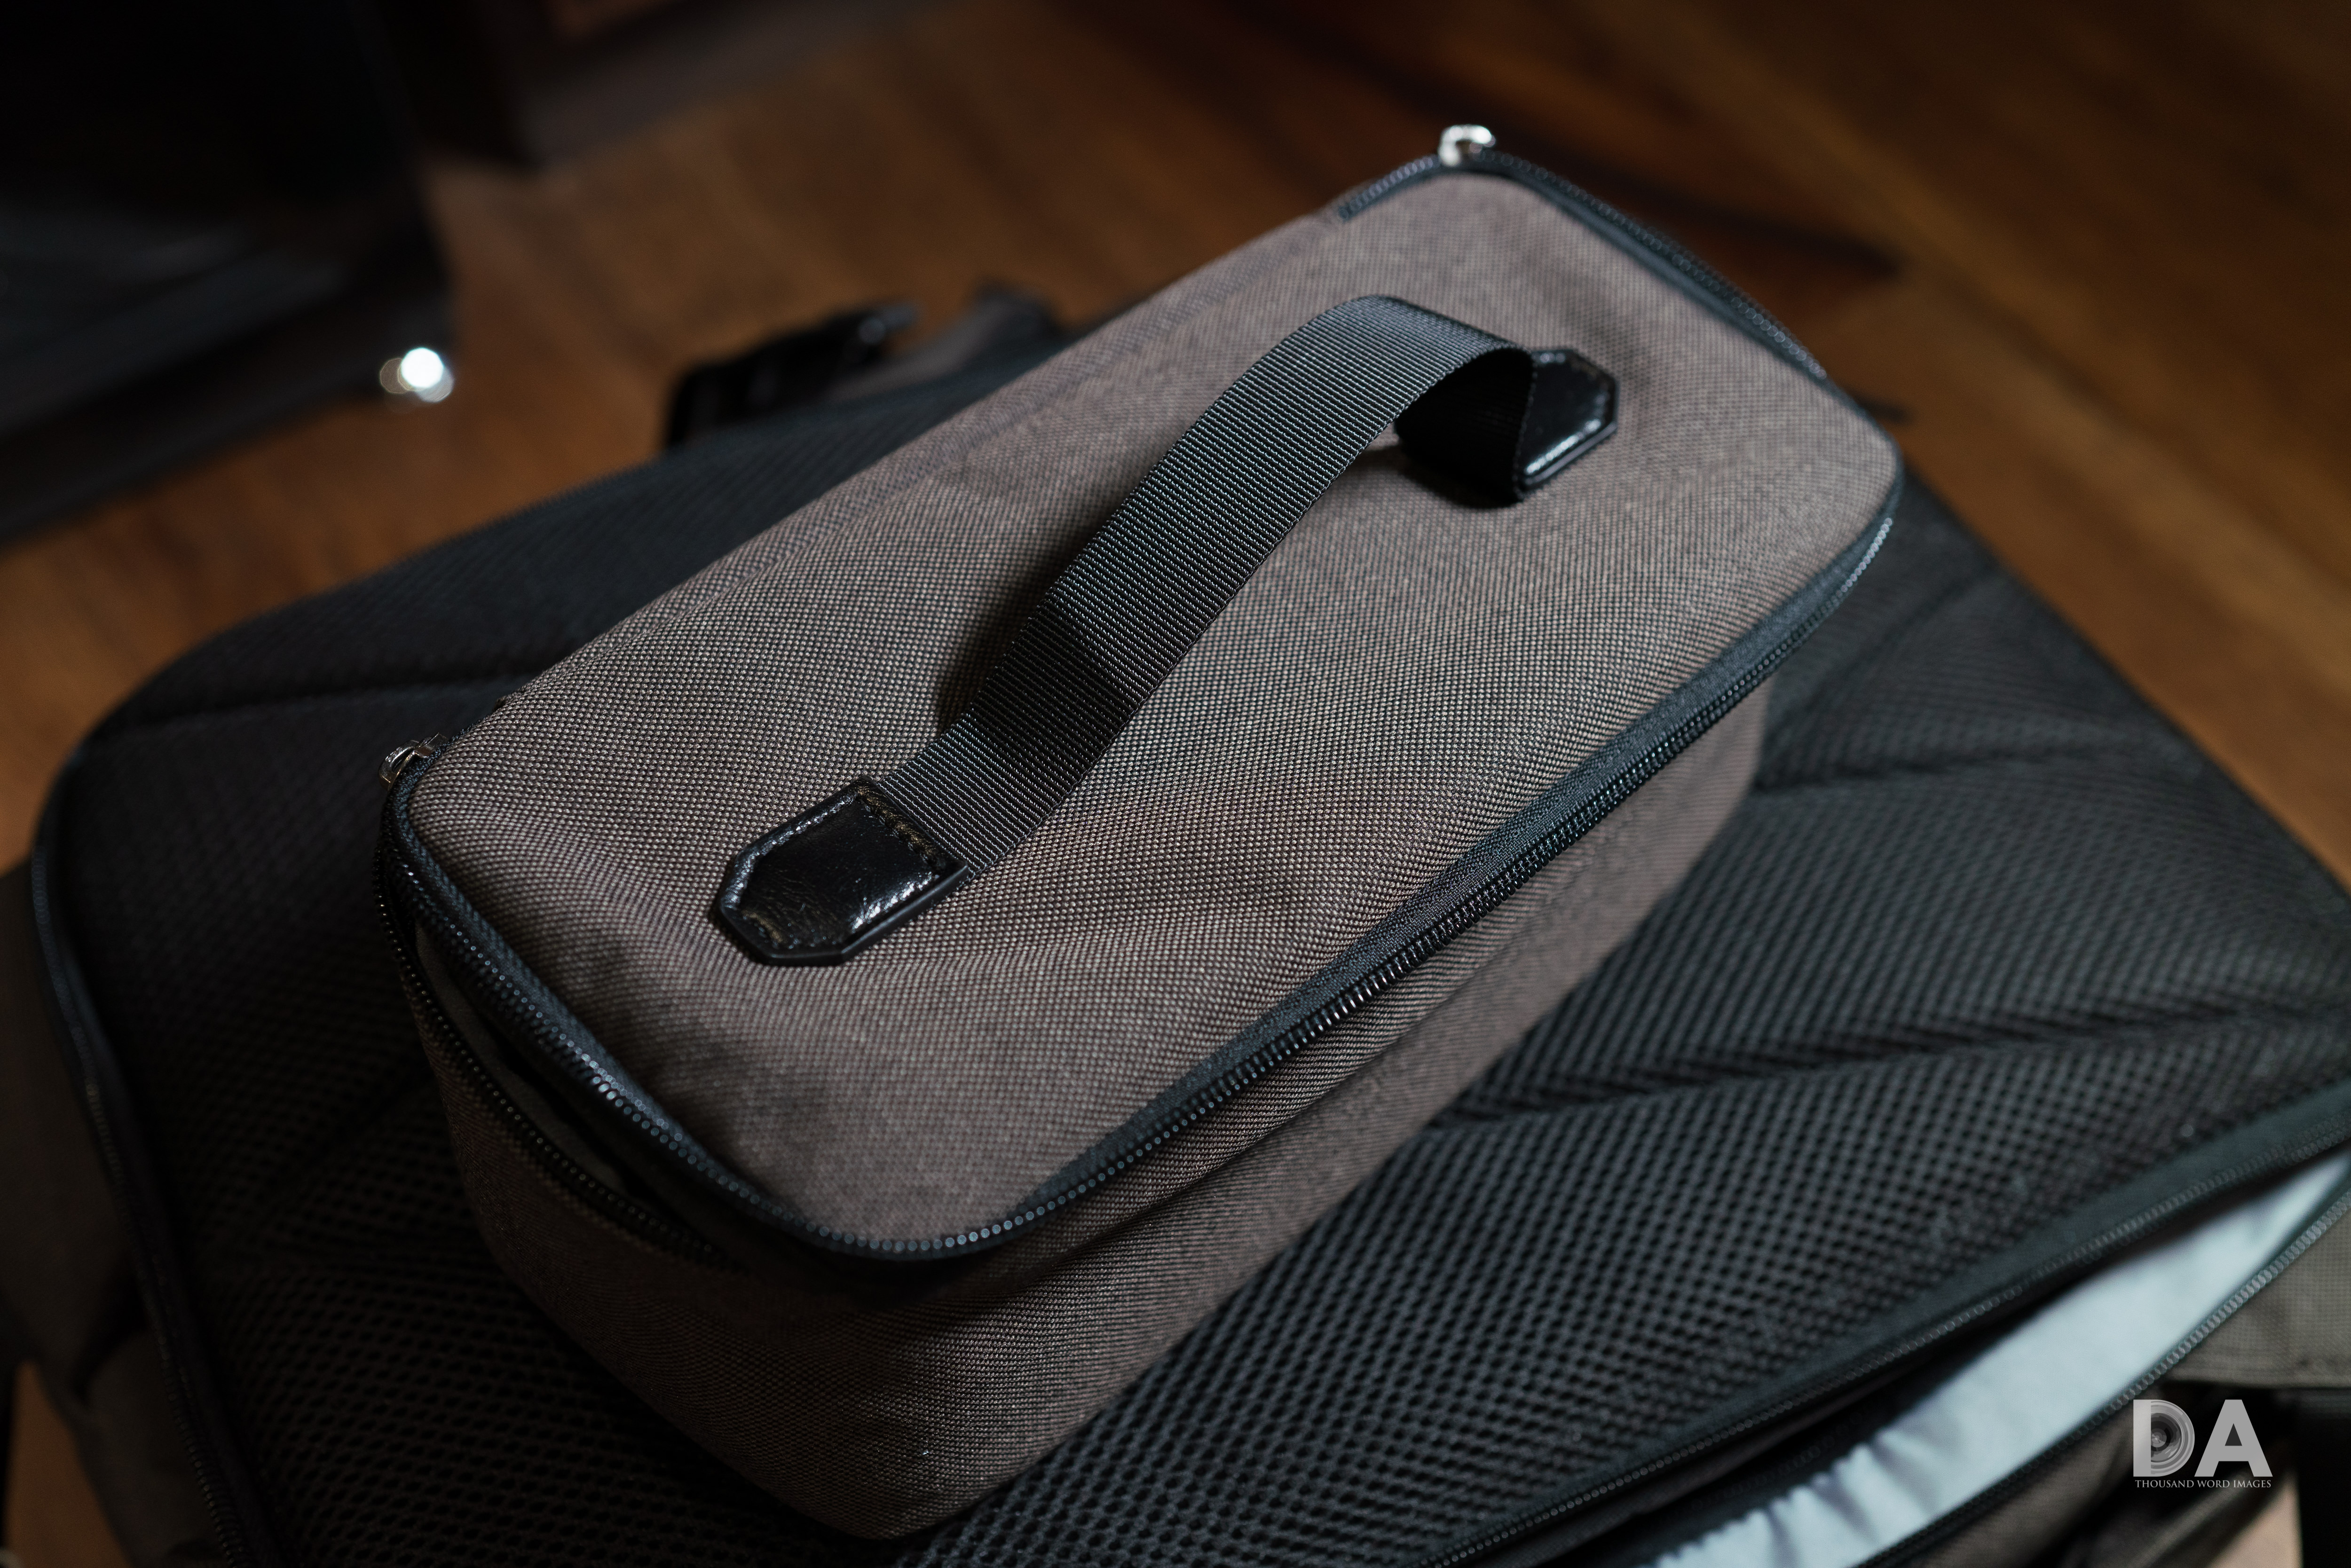 Less Than $65, and Great!: The BAGSMART Camera Backpack Review